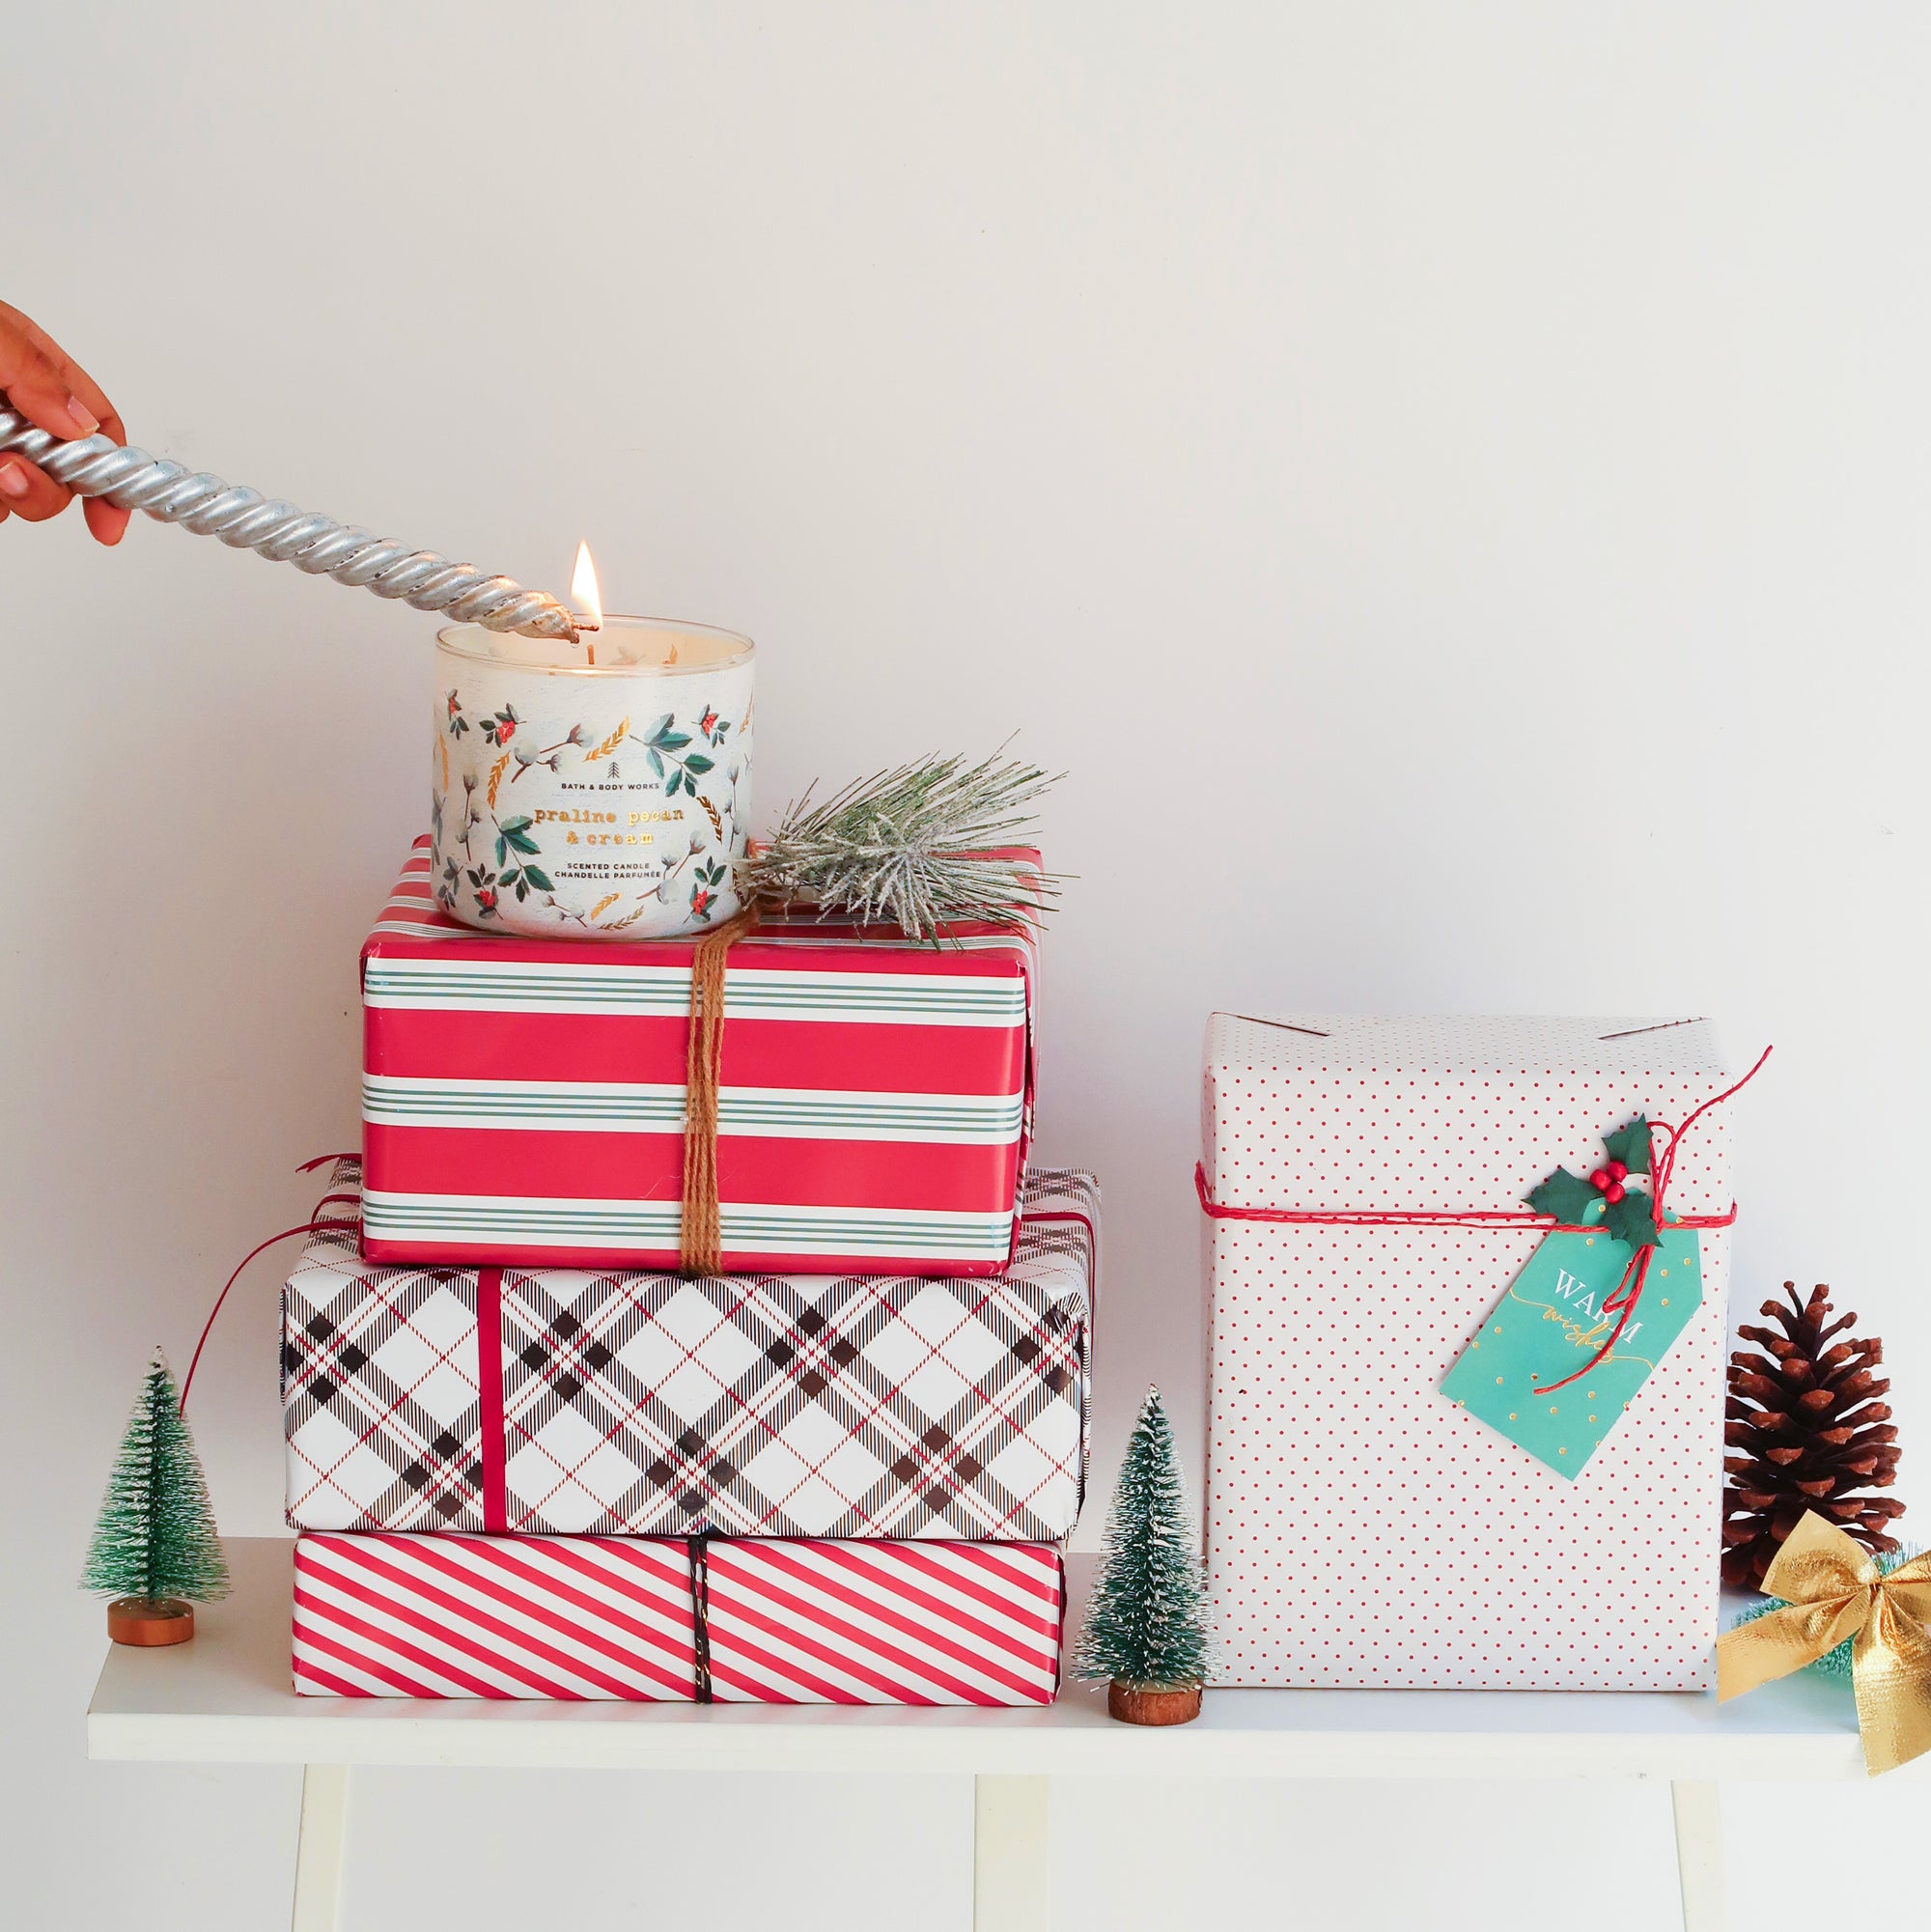 5 things to keep in mind this gifting season